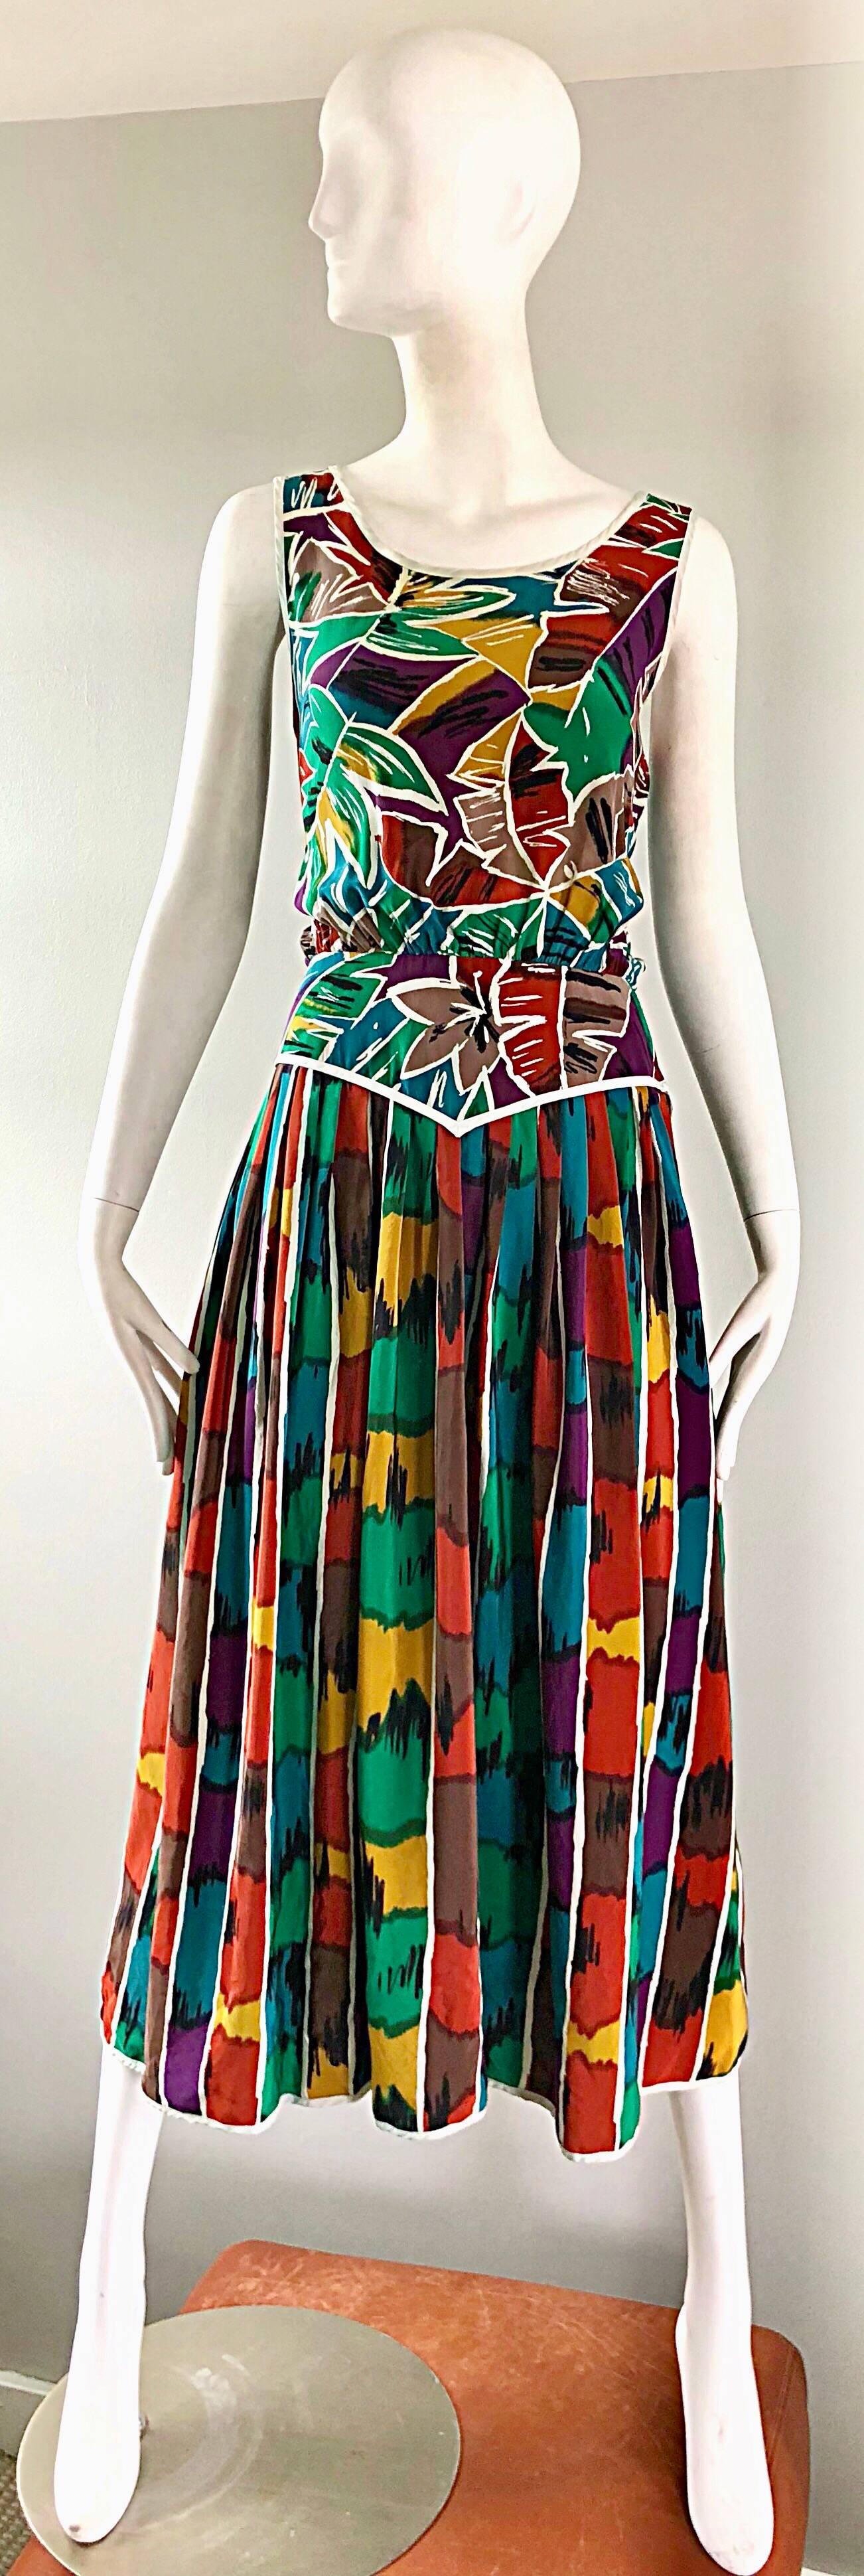 Chic vintage Oscar de la Renta MISS O kaleidoscope / Ikat tropical print silk midi dress! Features a flattering tailored bodice, with a loose fitting forgiving full skirt. Vibrant colors of rust, kelly green, burnt orange, teal blue, purple, white